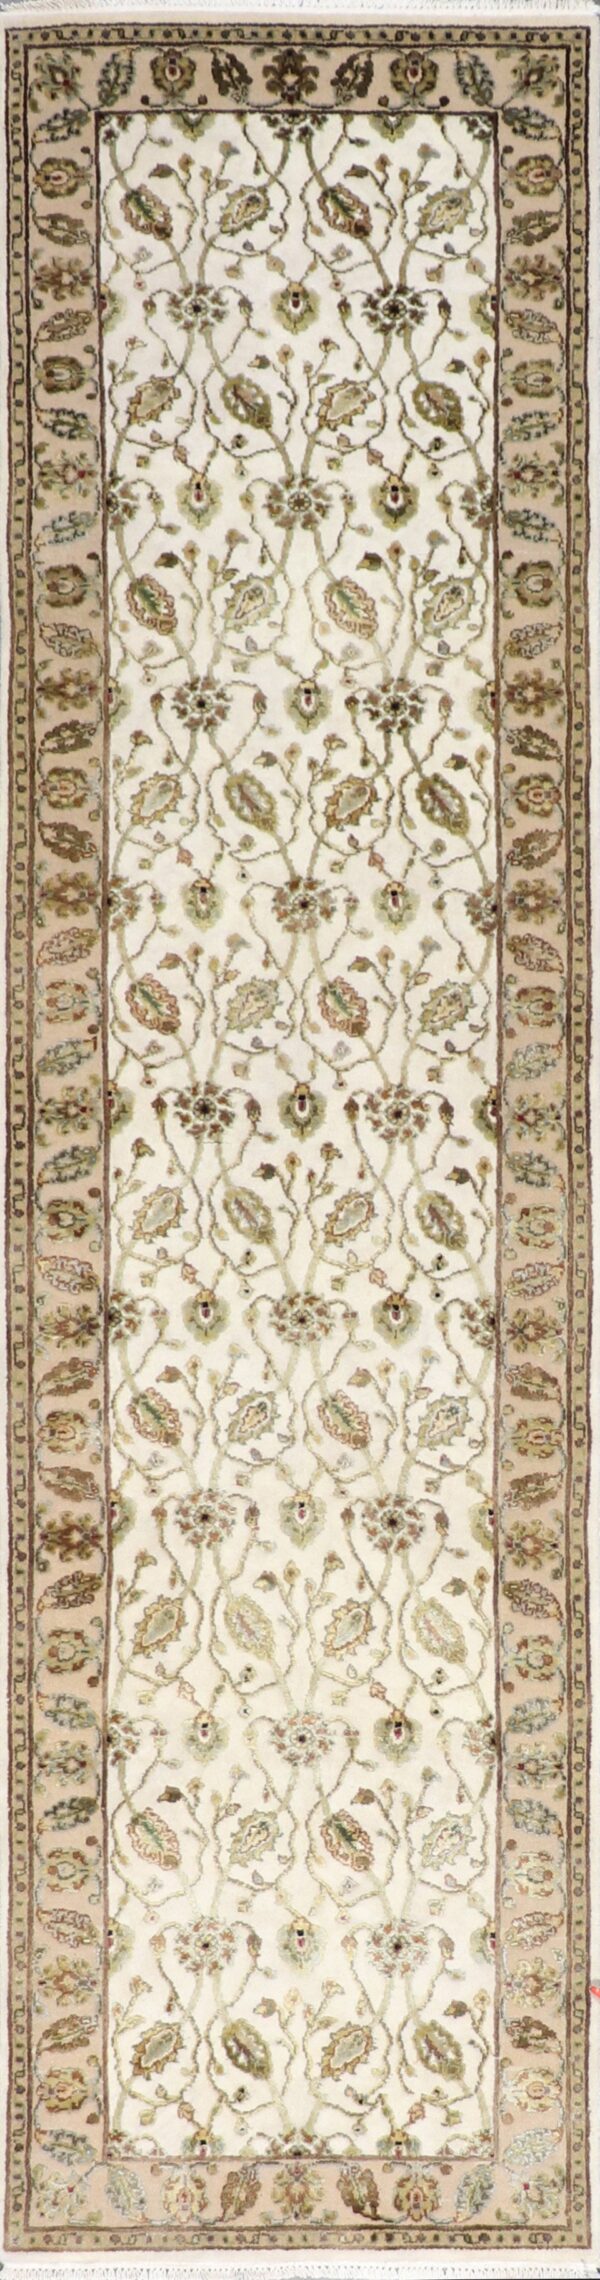 2’6”x10’2” Traditional Ivory Wool & Silk Hand-Knotted Rug - Direct Rug Import | Rugs in Chicago, Indiana,South Bend,Granger